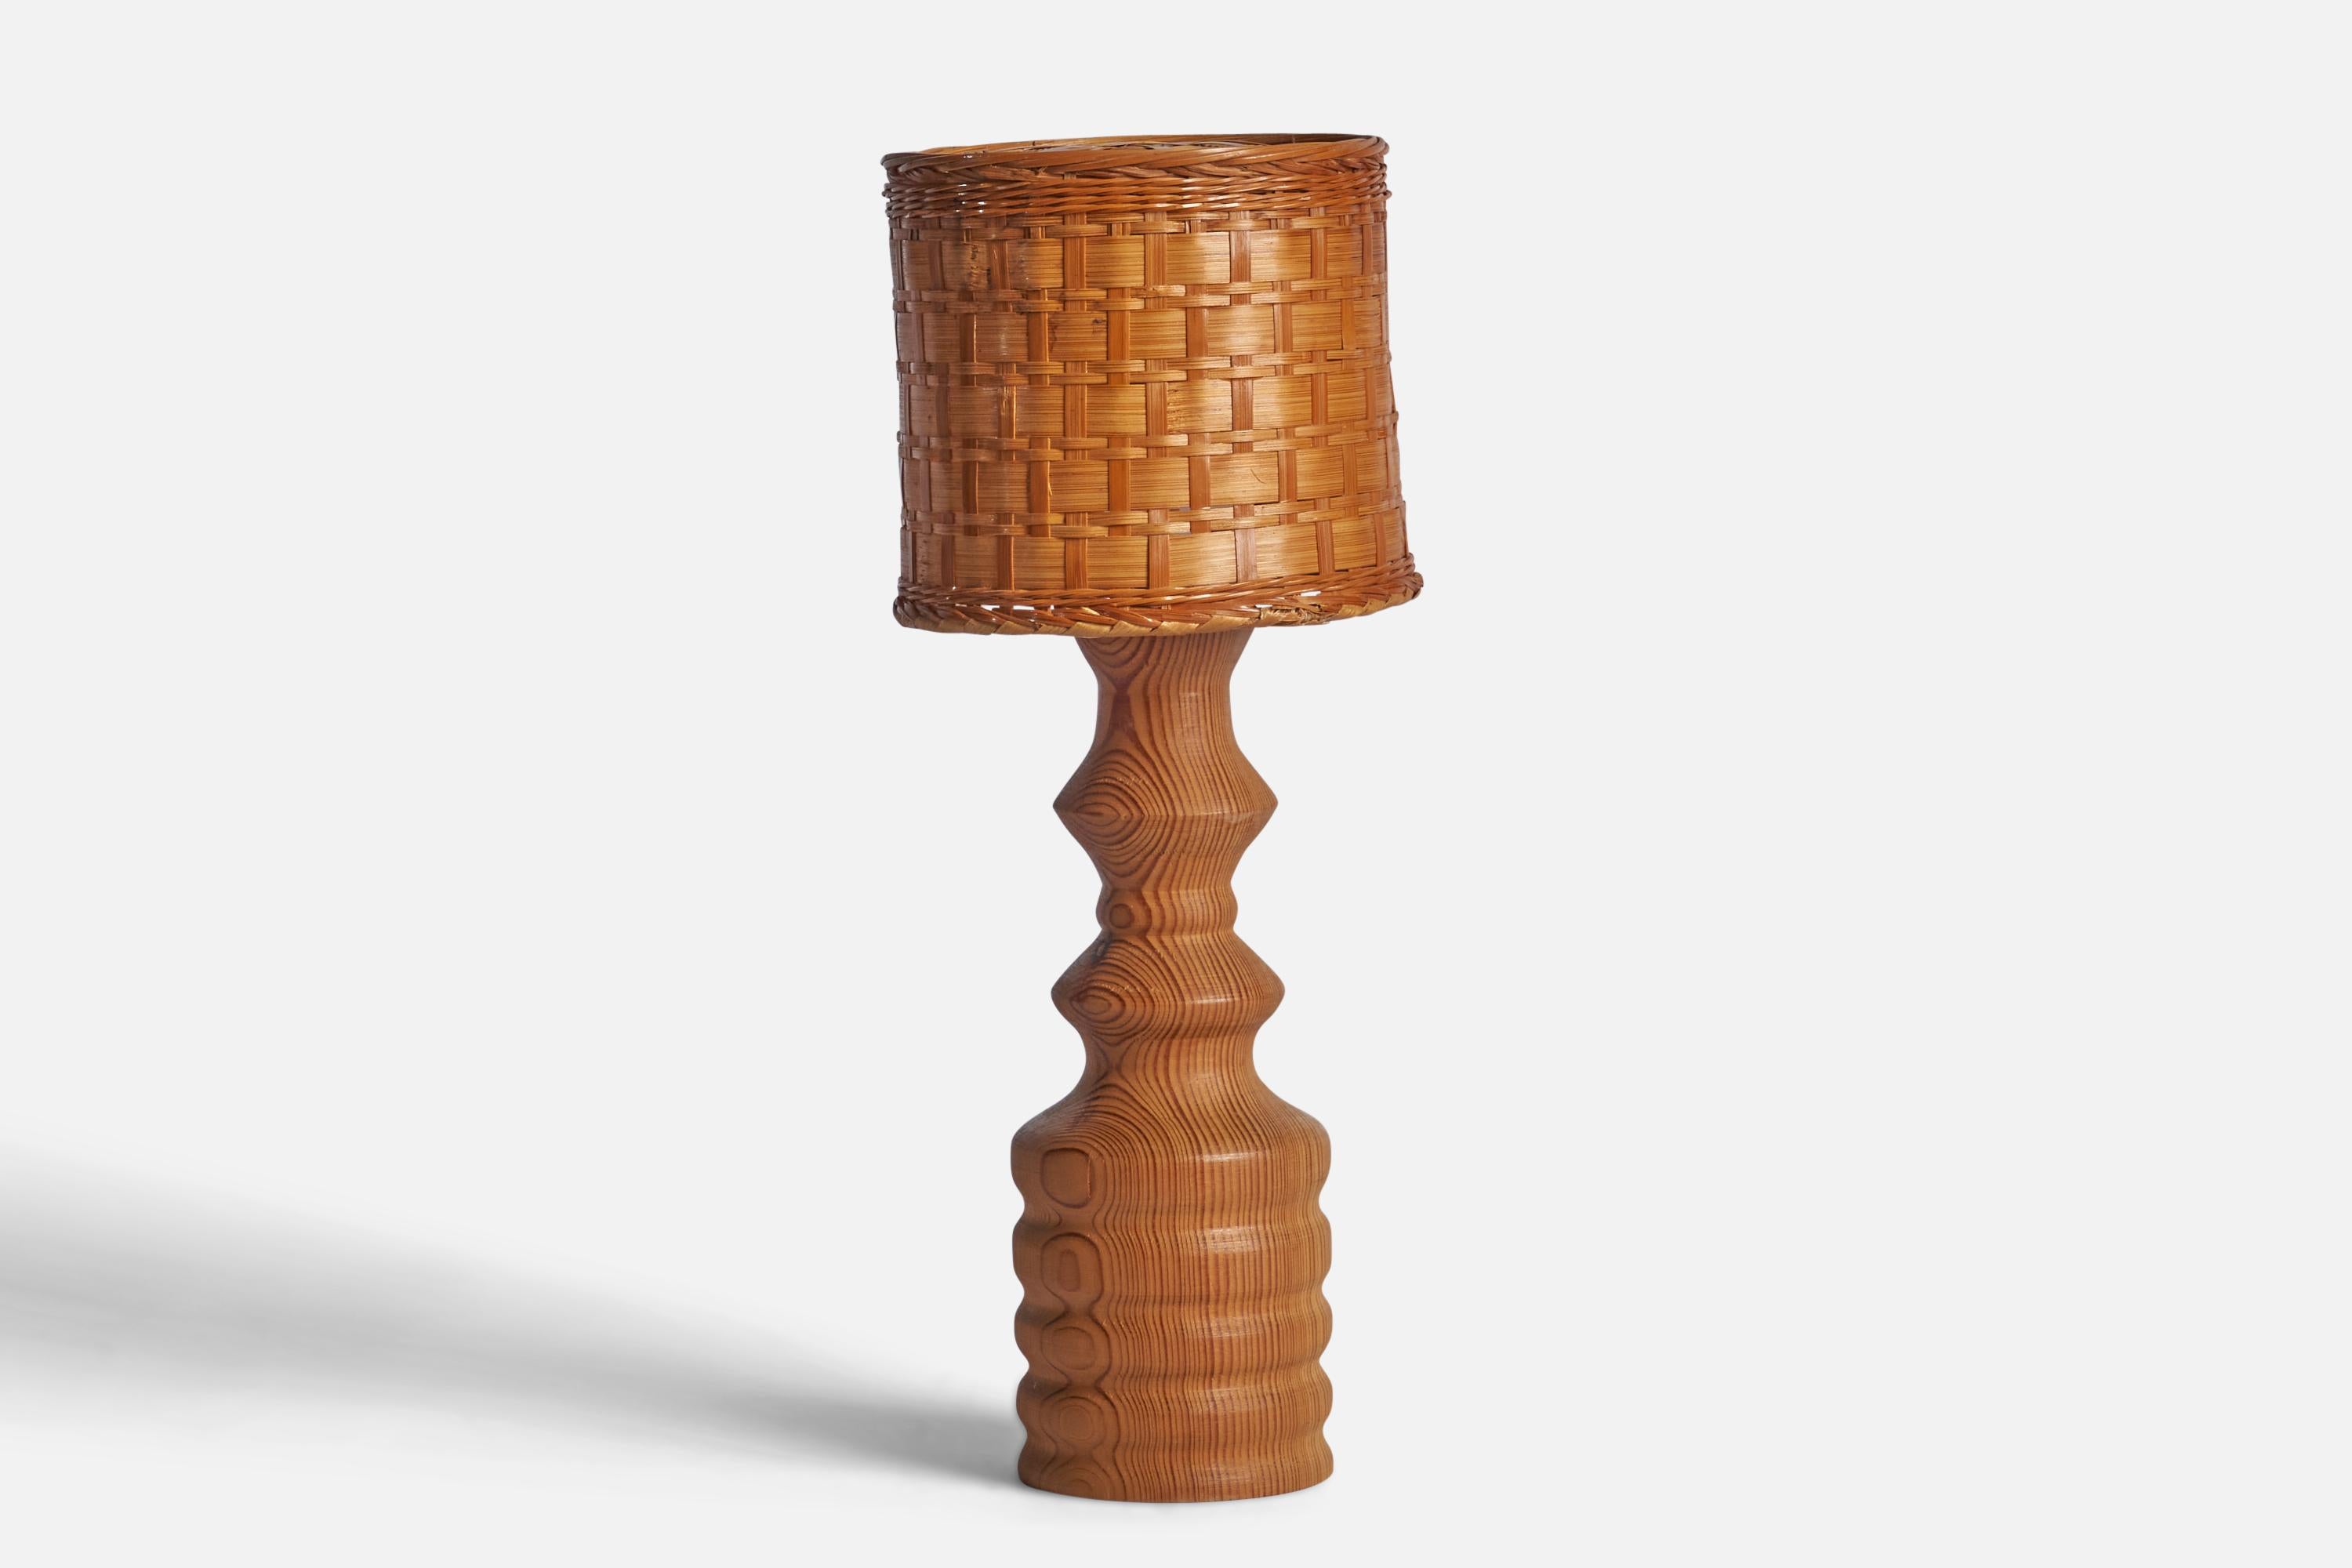 A pine and rattan table lamp designed and produced in Sweden, c. 1970s.

Overall Dimensions (inches): 16